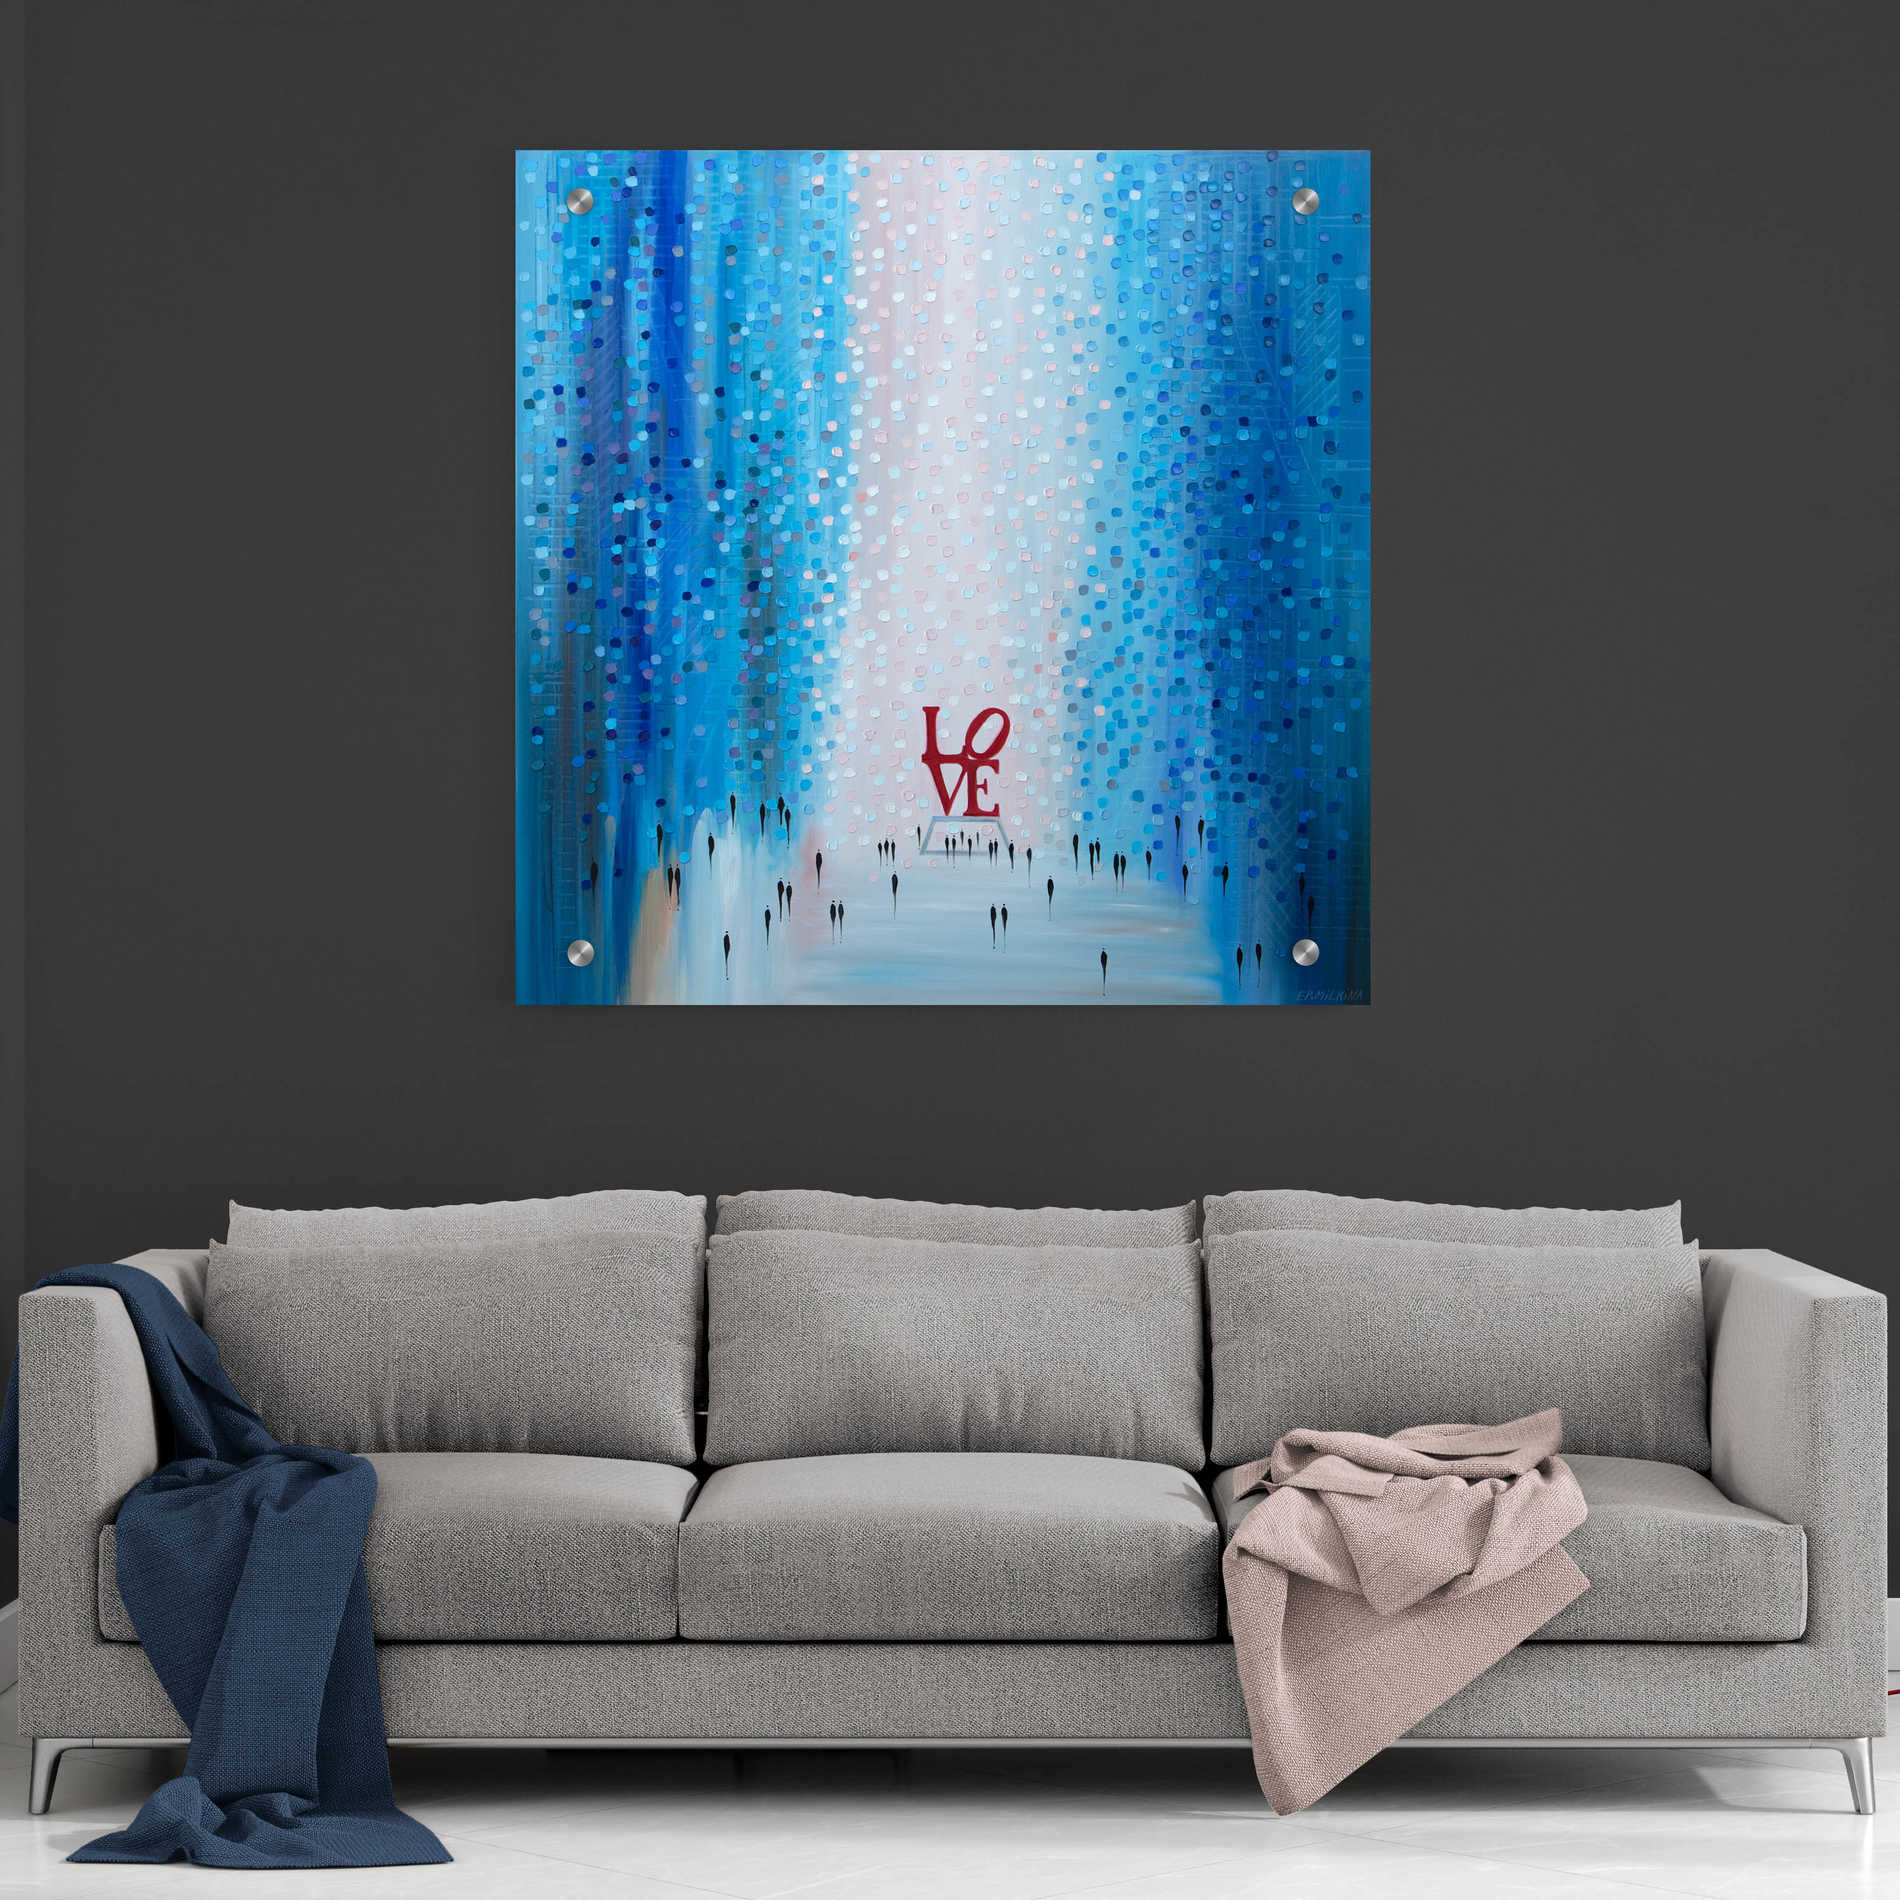 Epic Art 'In Love With You' by Ekaterina Ermilkina, Acrylic Glass Wall Art,36x36